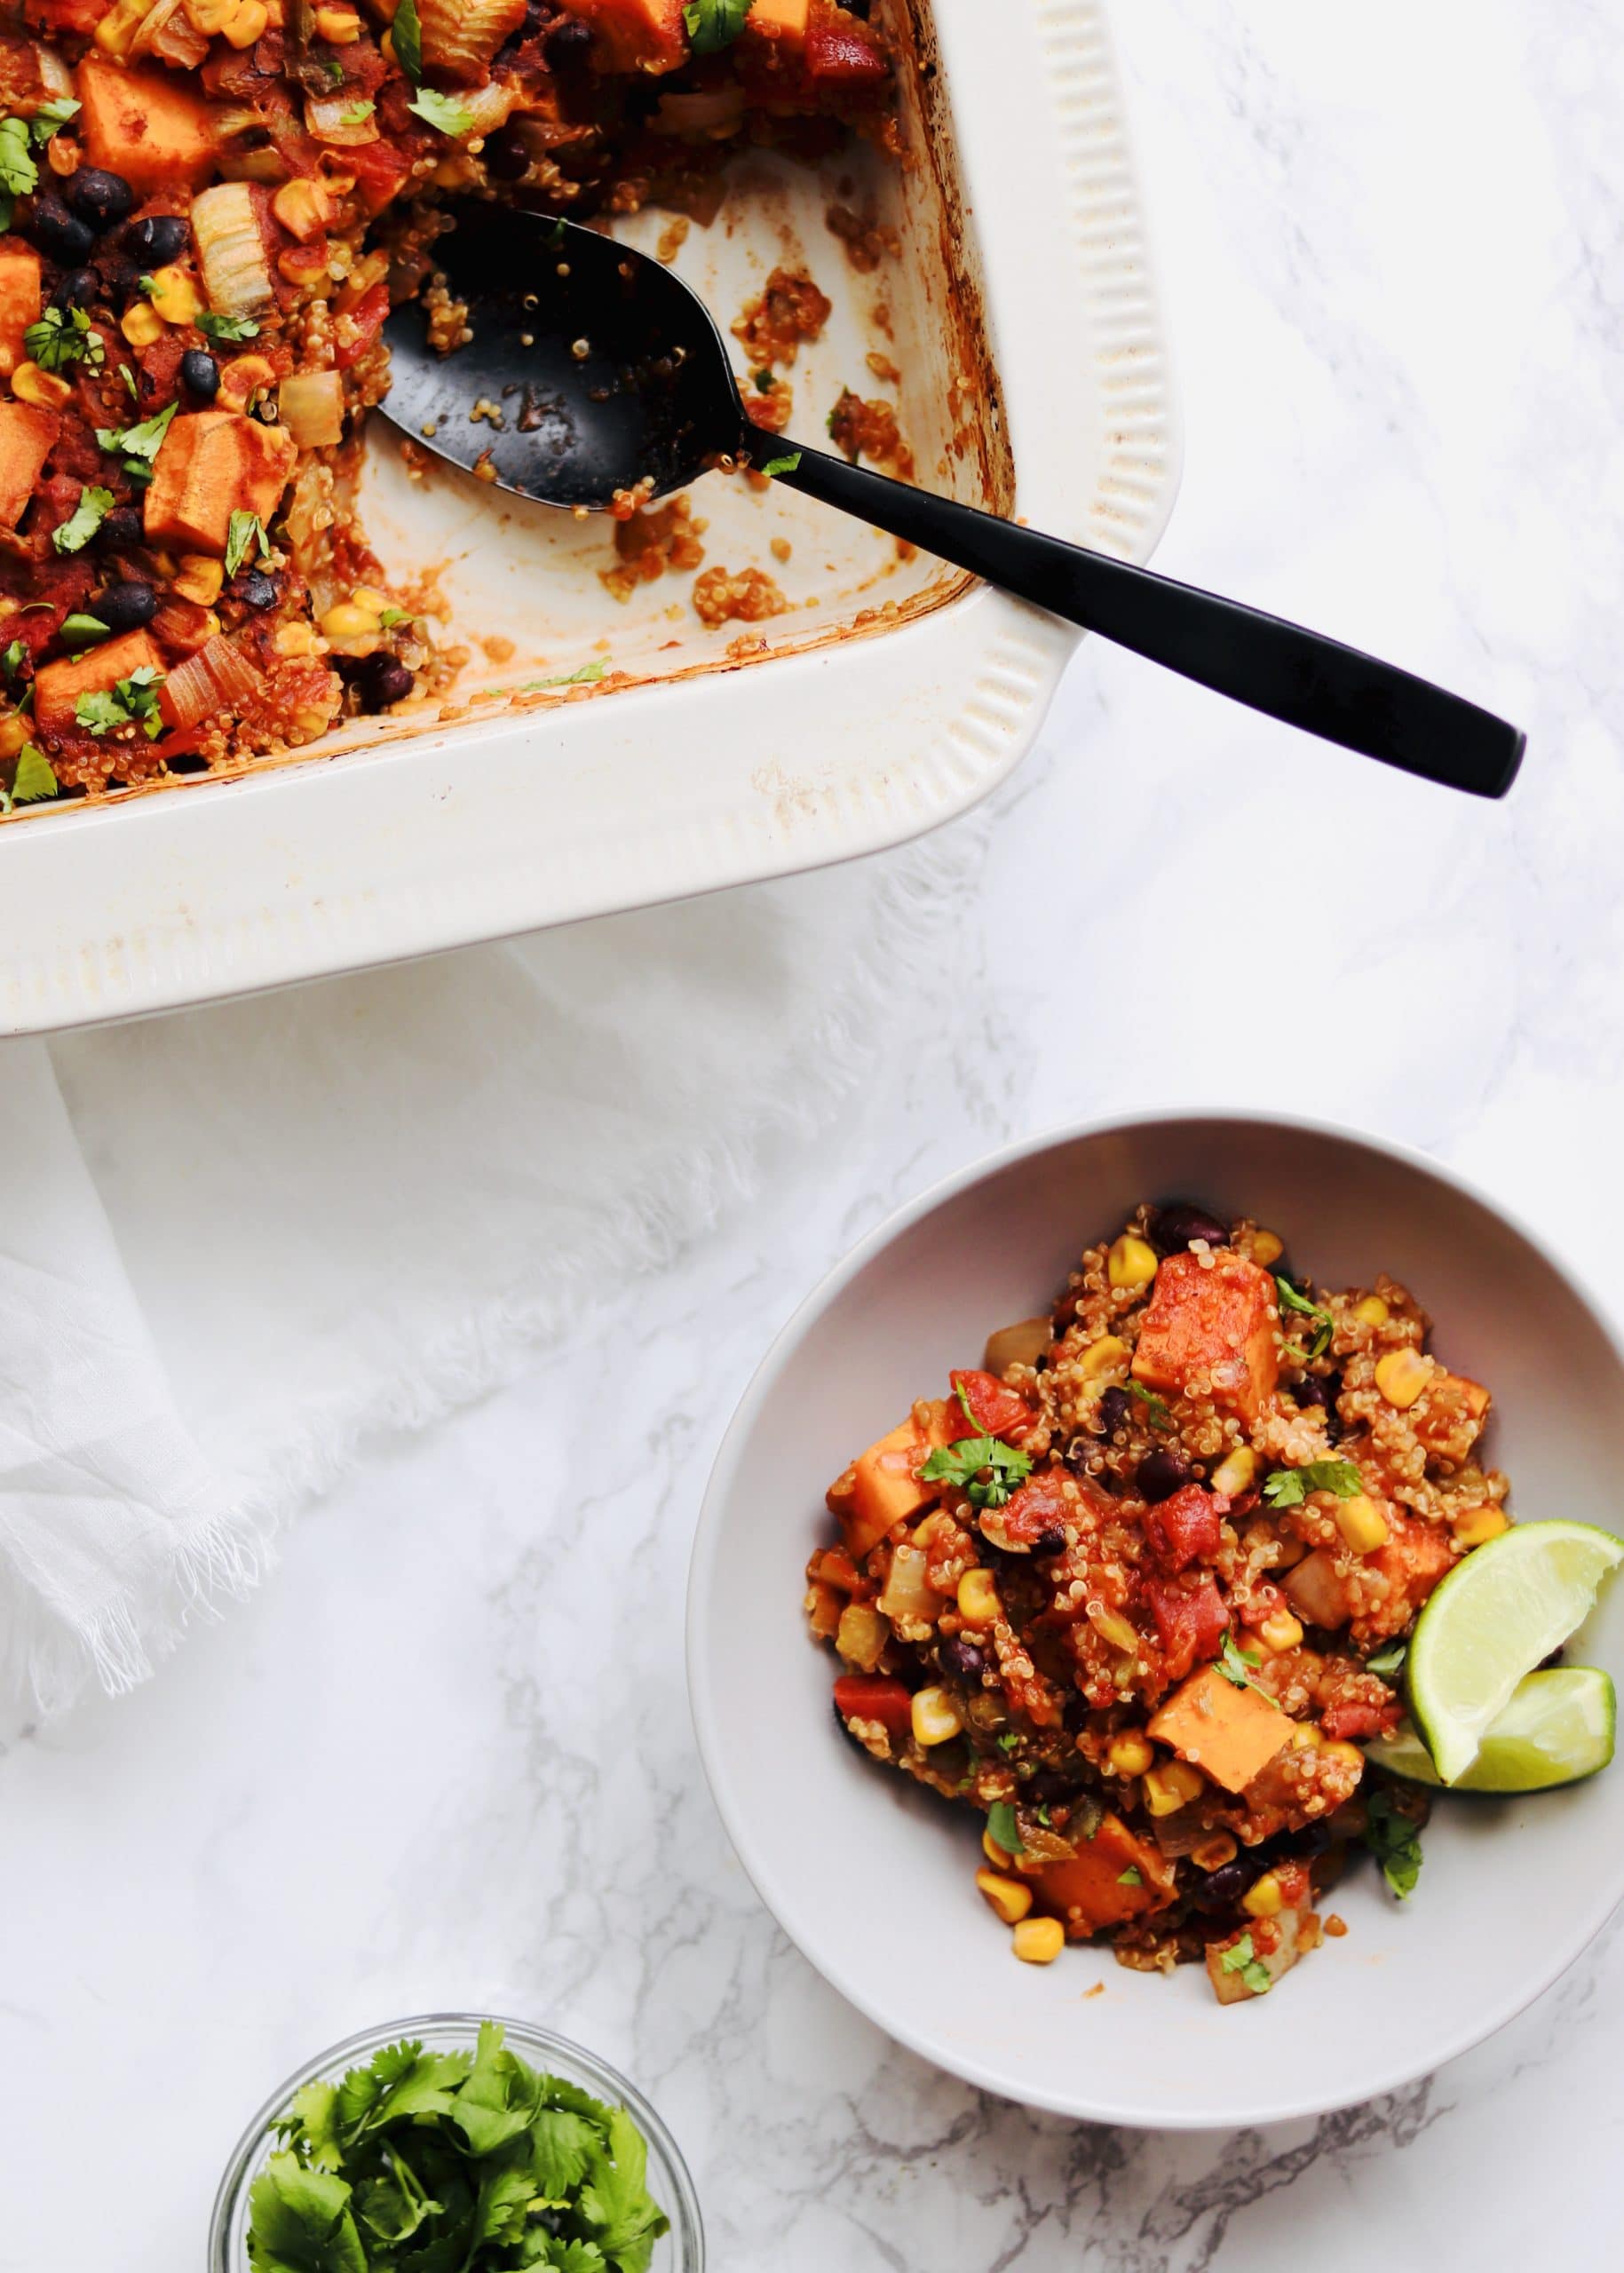 Vegan mexican quinoa bake in bowl and dish